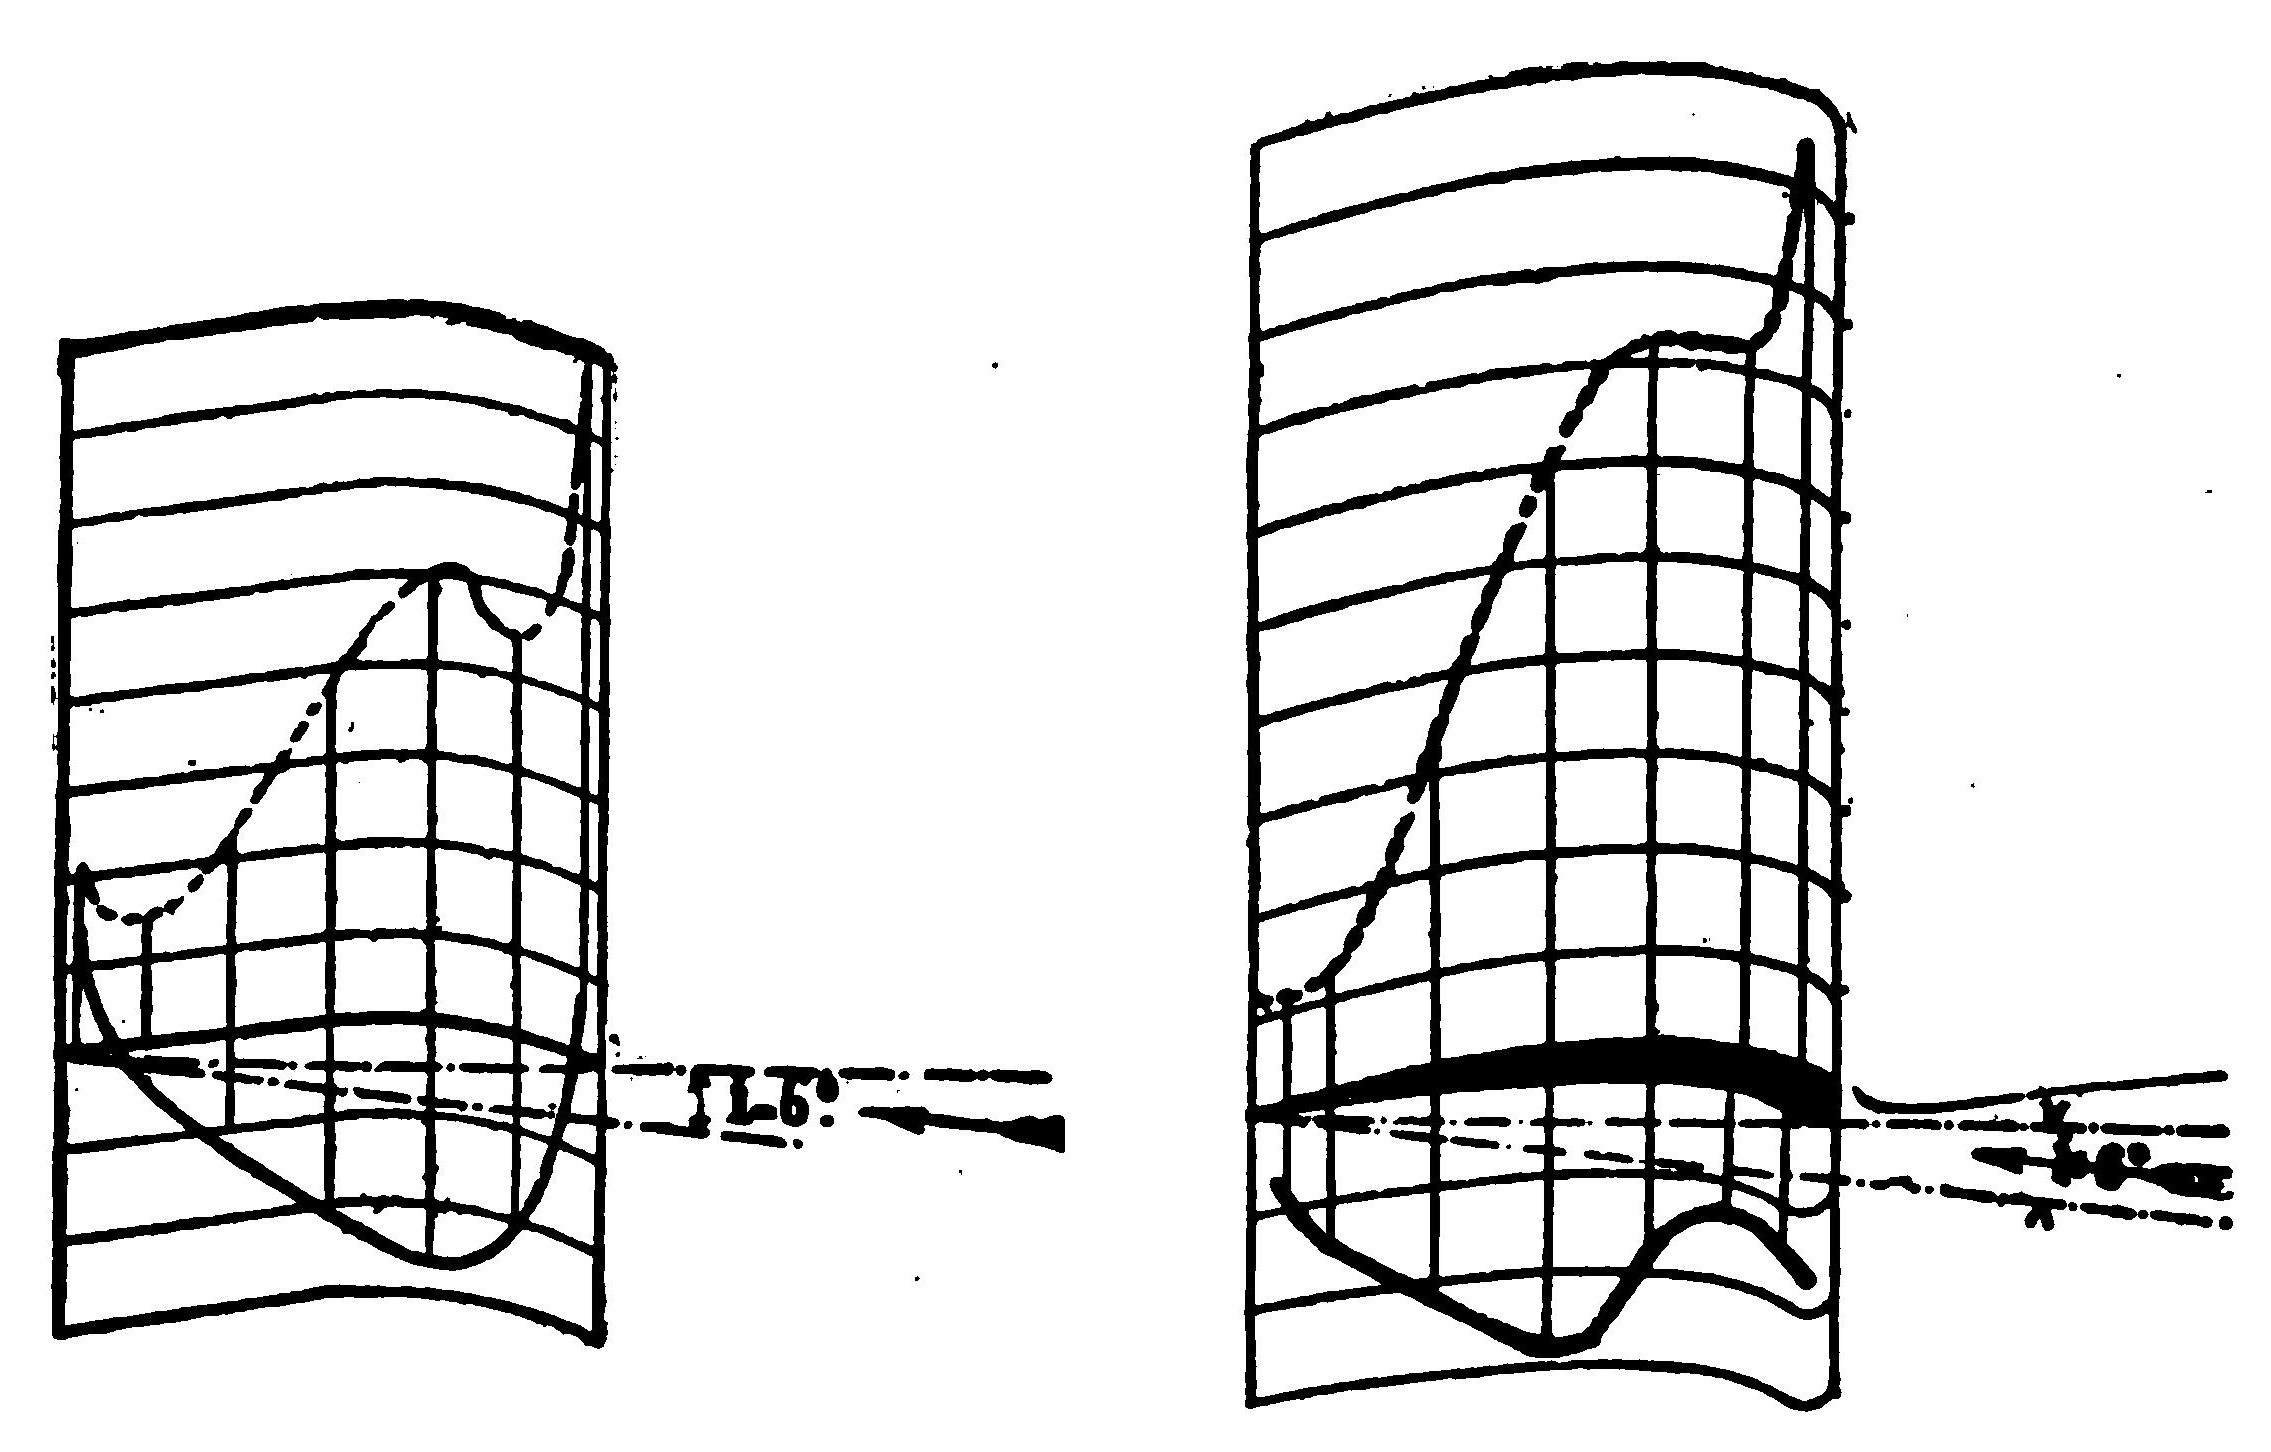 Fig. 10. Thin Parabolic Aerofoil with Pressure Distribution. Fig. 11. Pressure Distribution of Thick Bird's Wing Type. (Eiffel)